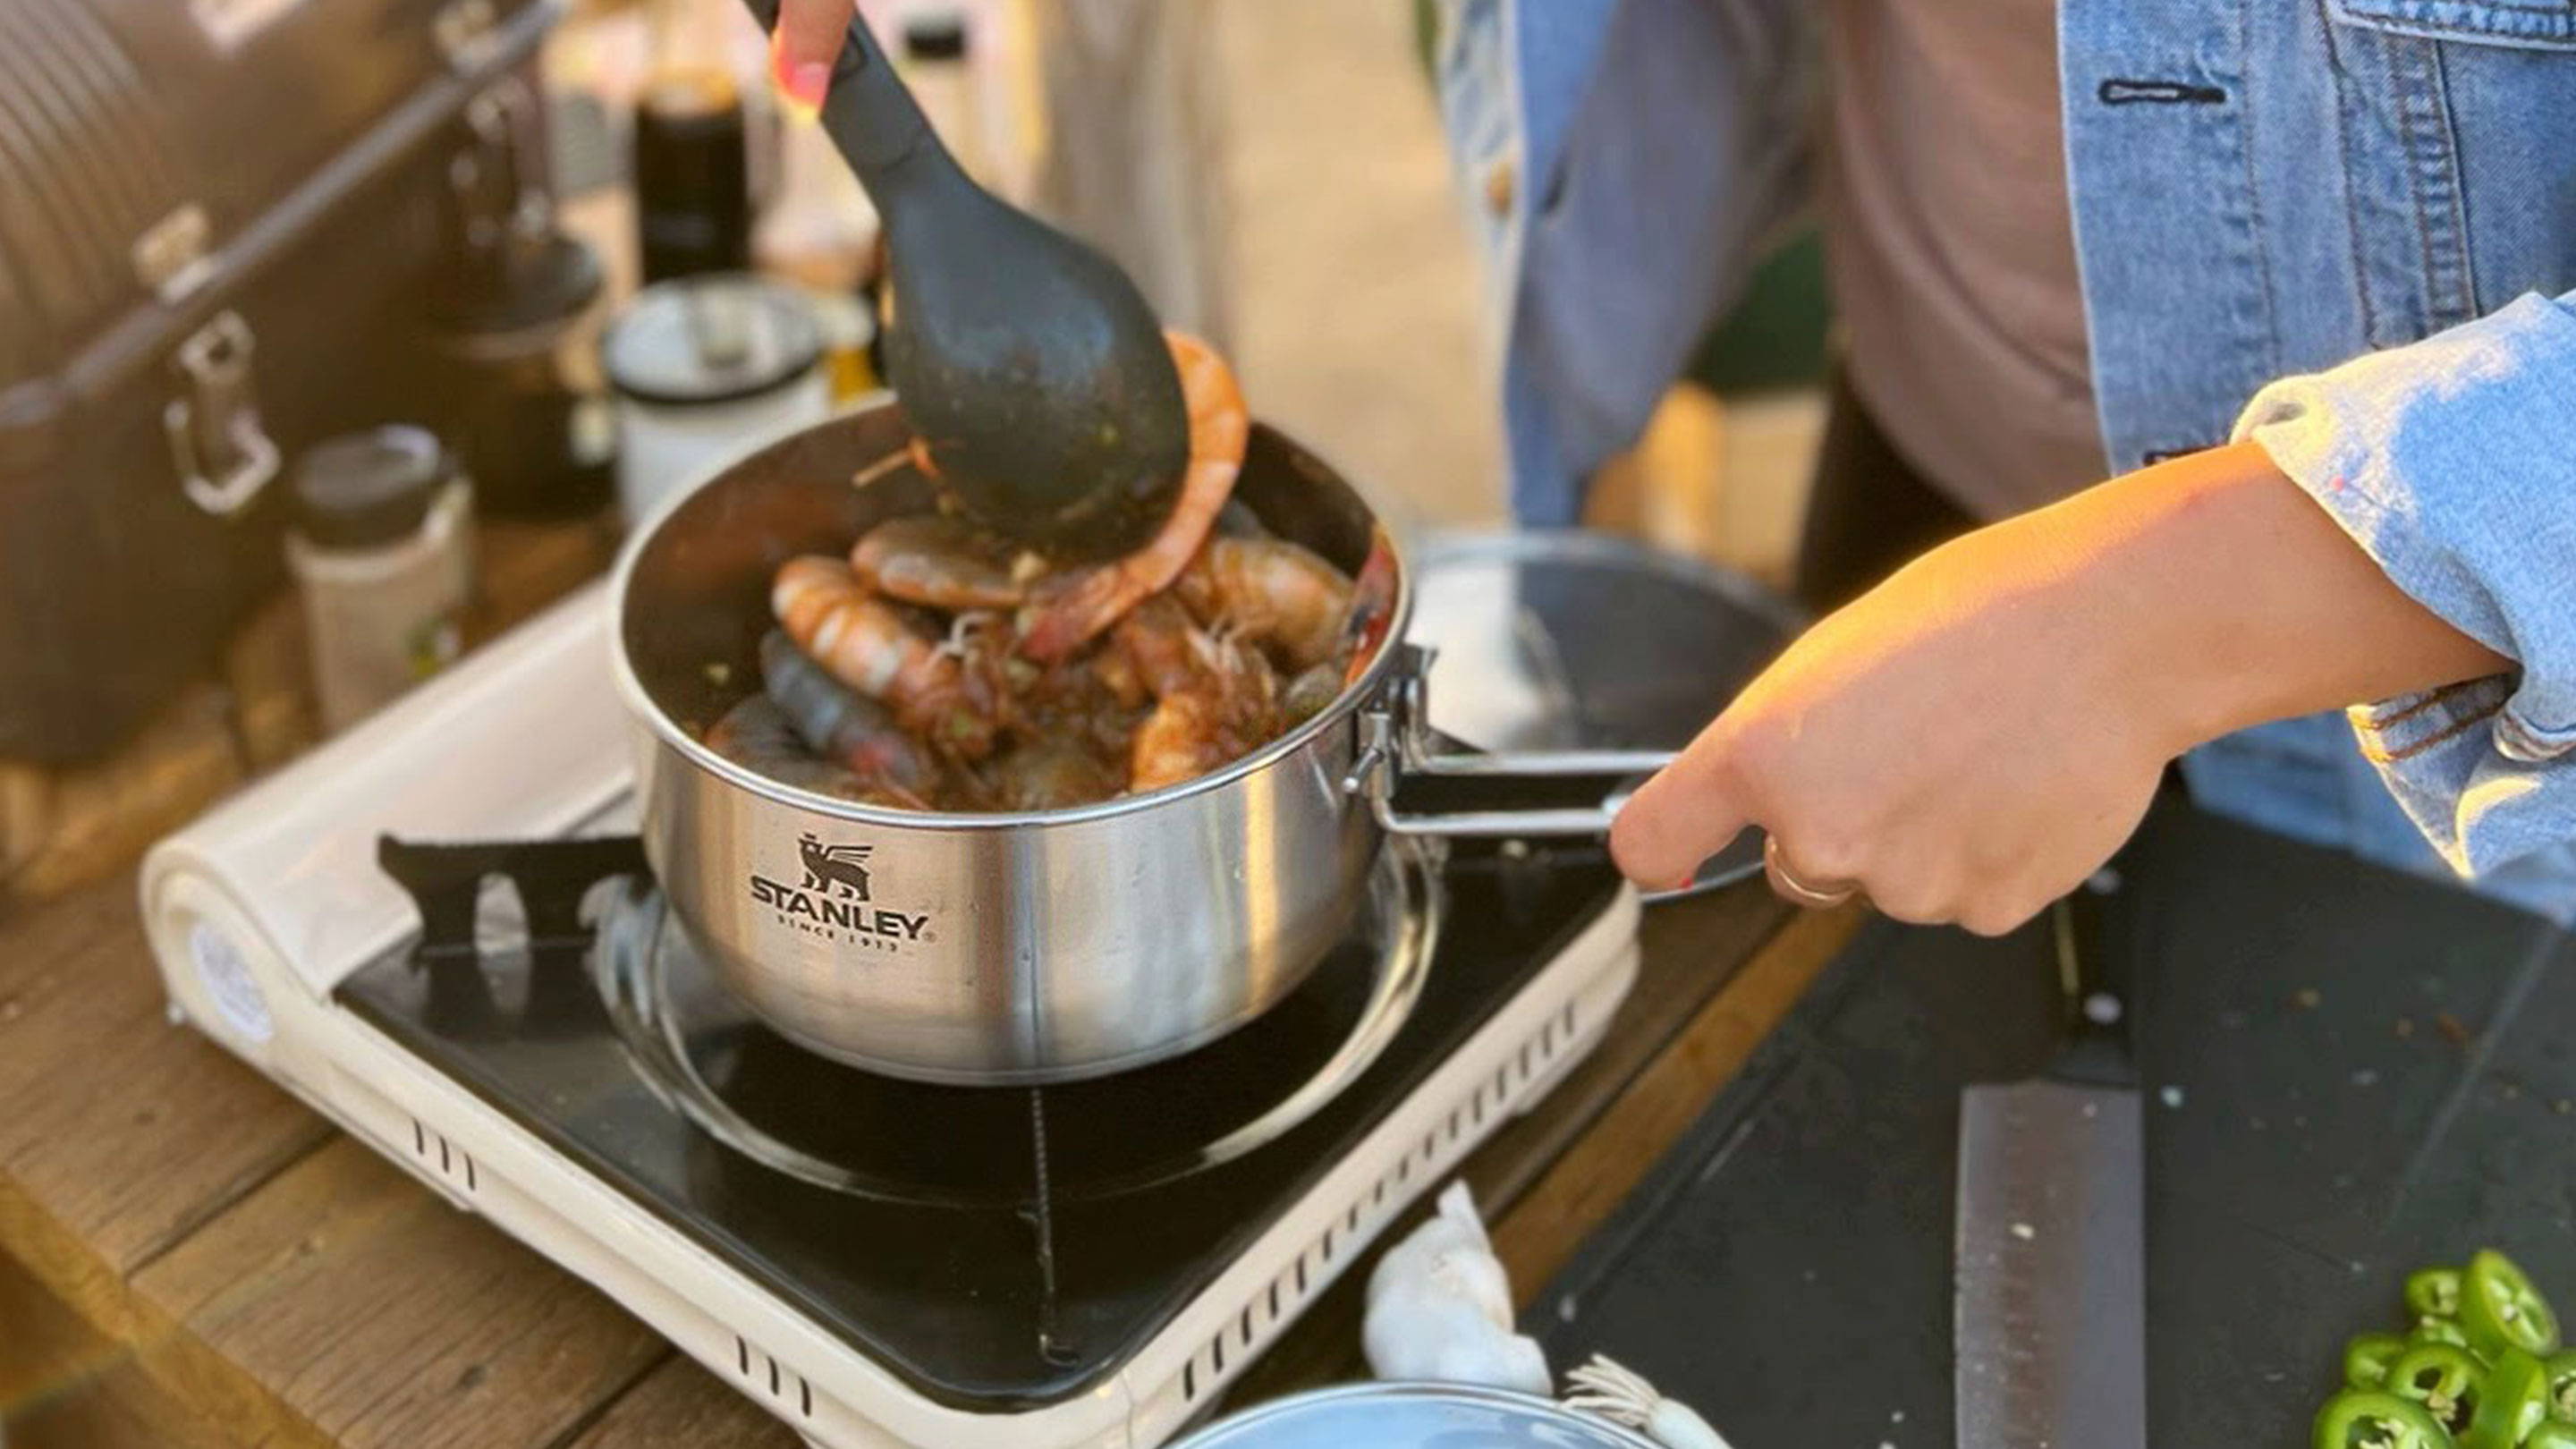 Chef Stephanie Tea cooks shrimp in Stanley’s stainless-steel sauce pan on a camp stove.